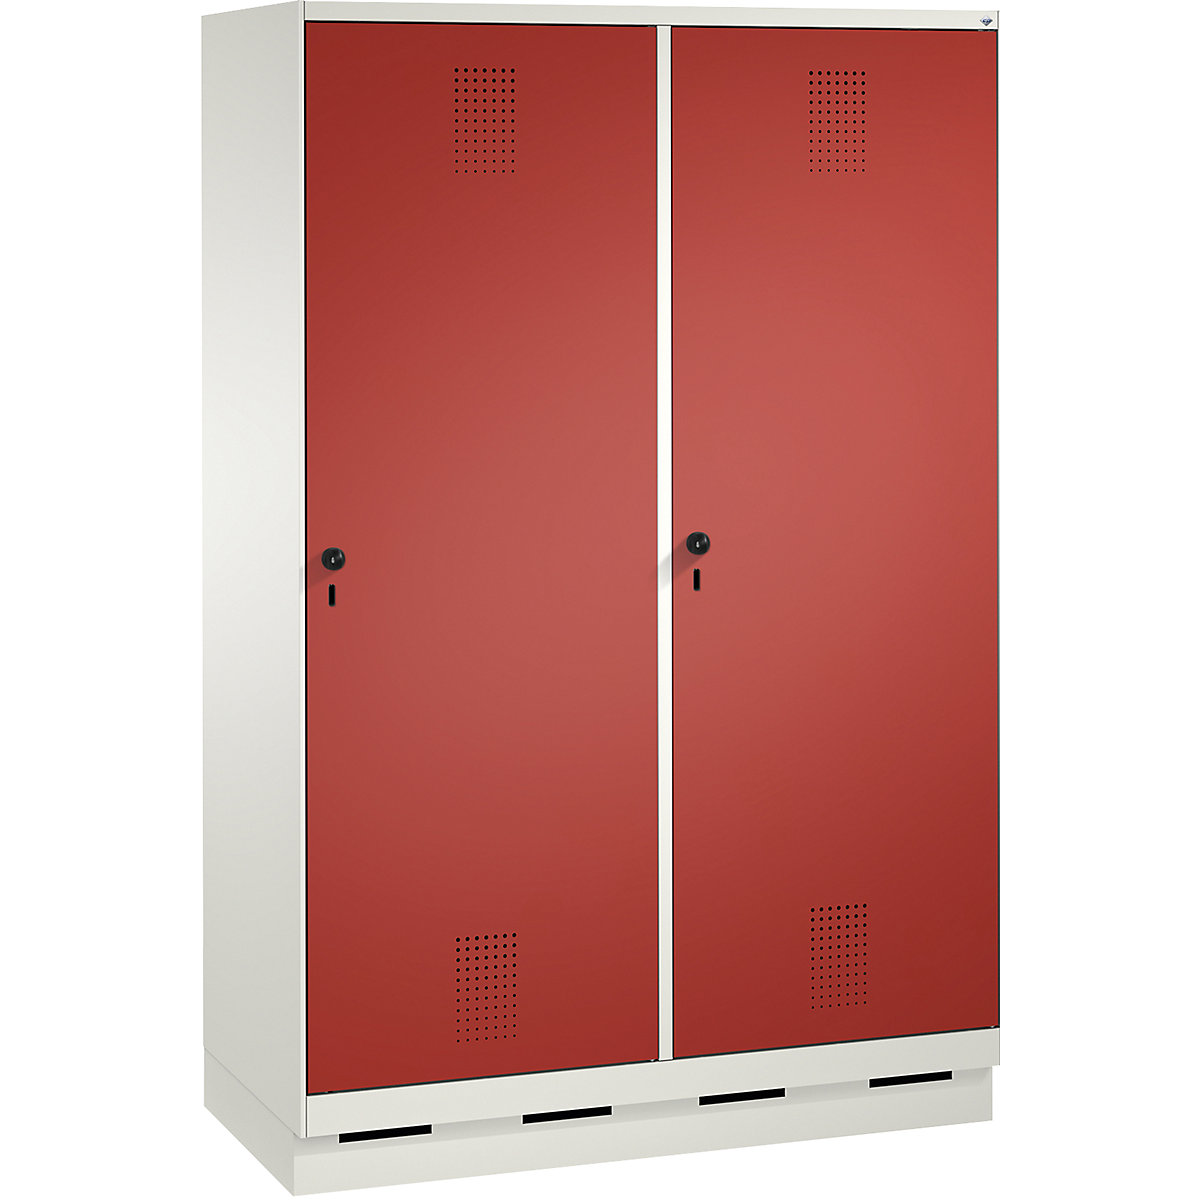 EVOLO cloakroom locker, door for 2 compartments, with plinth – C+P, 4 compartments, 2 doors, compartment width 300 mm, traffic white / flame red-11